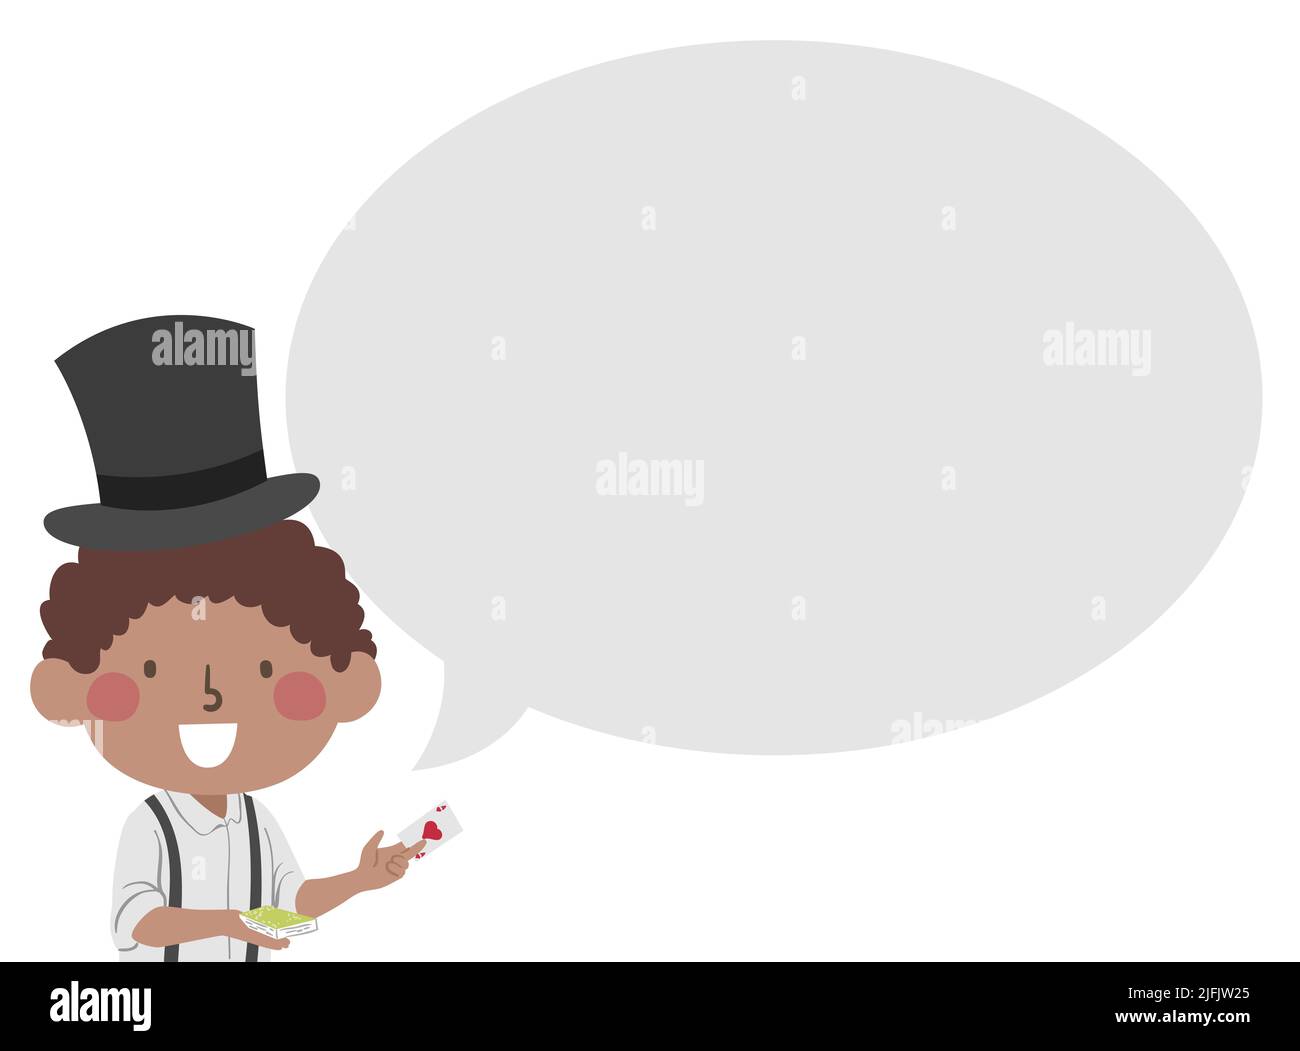 Illustration of African American Kid Boy Wearing Top Hat, Holding Magic Cards with Speech Bubble Stock Photo